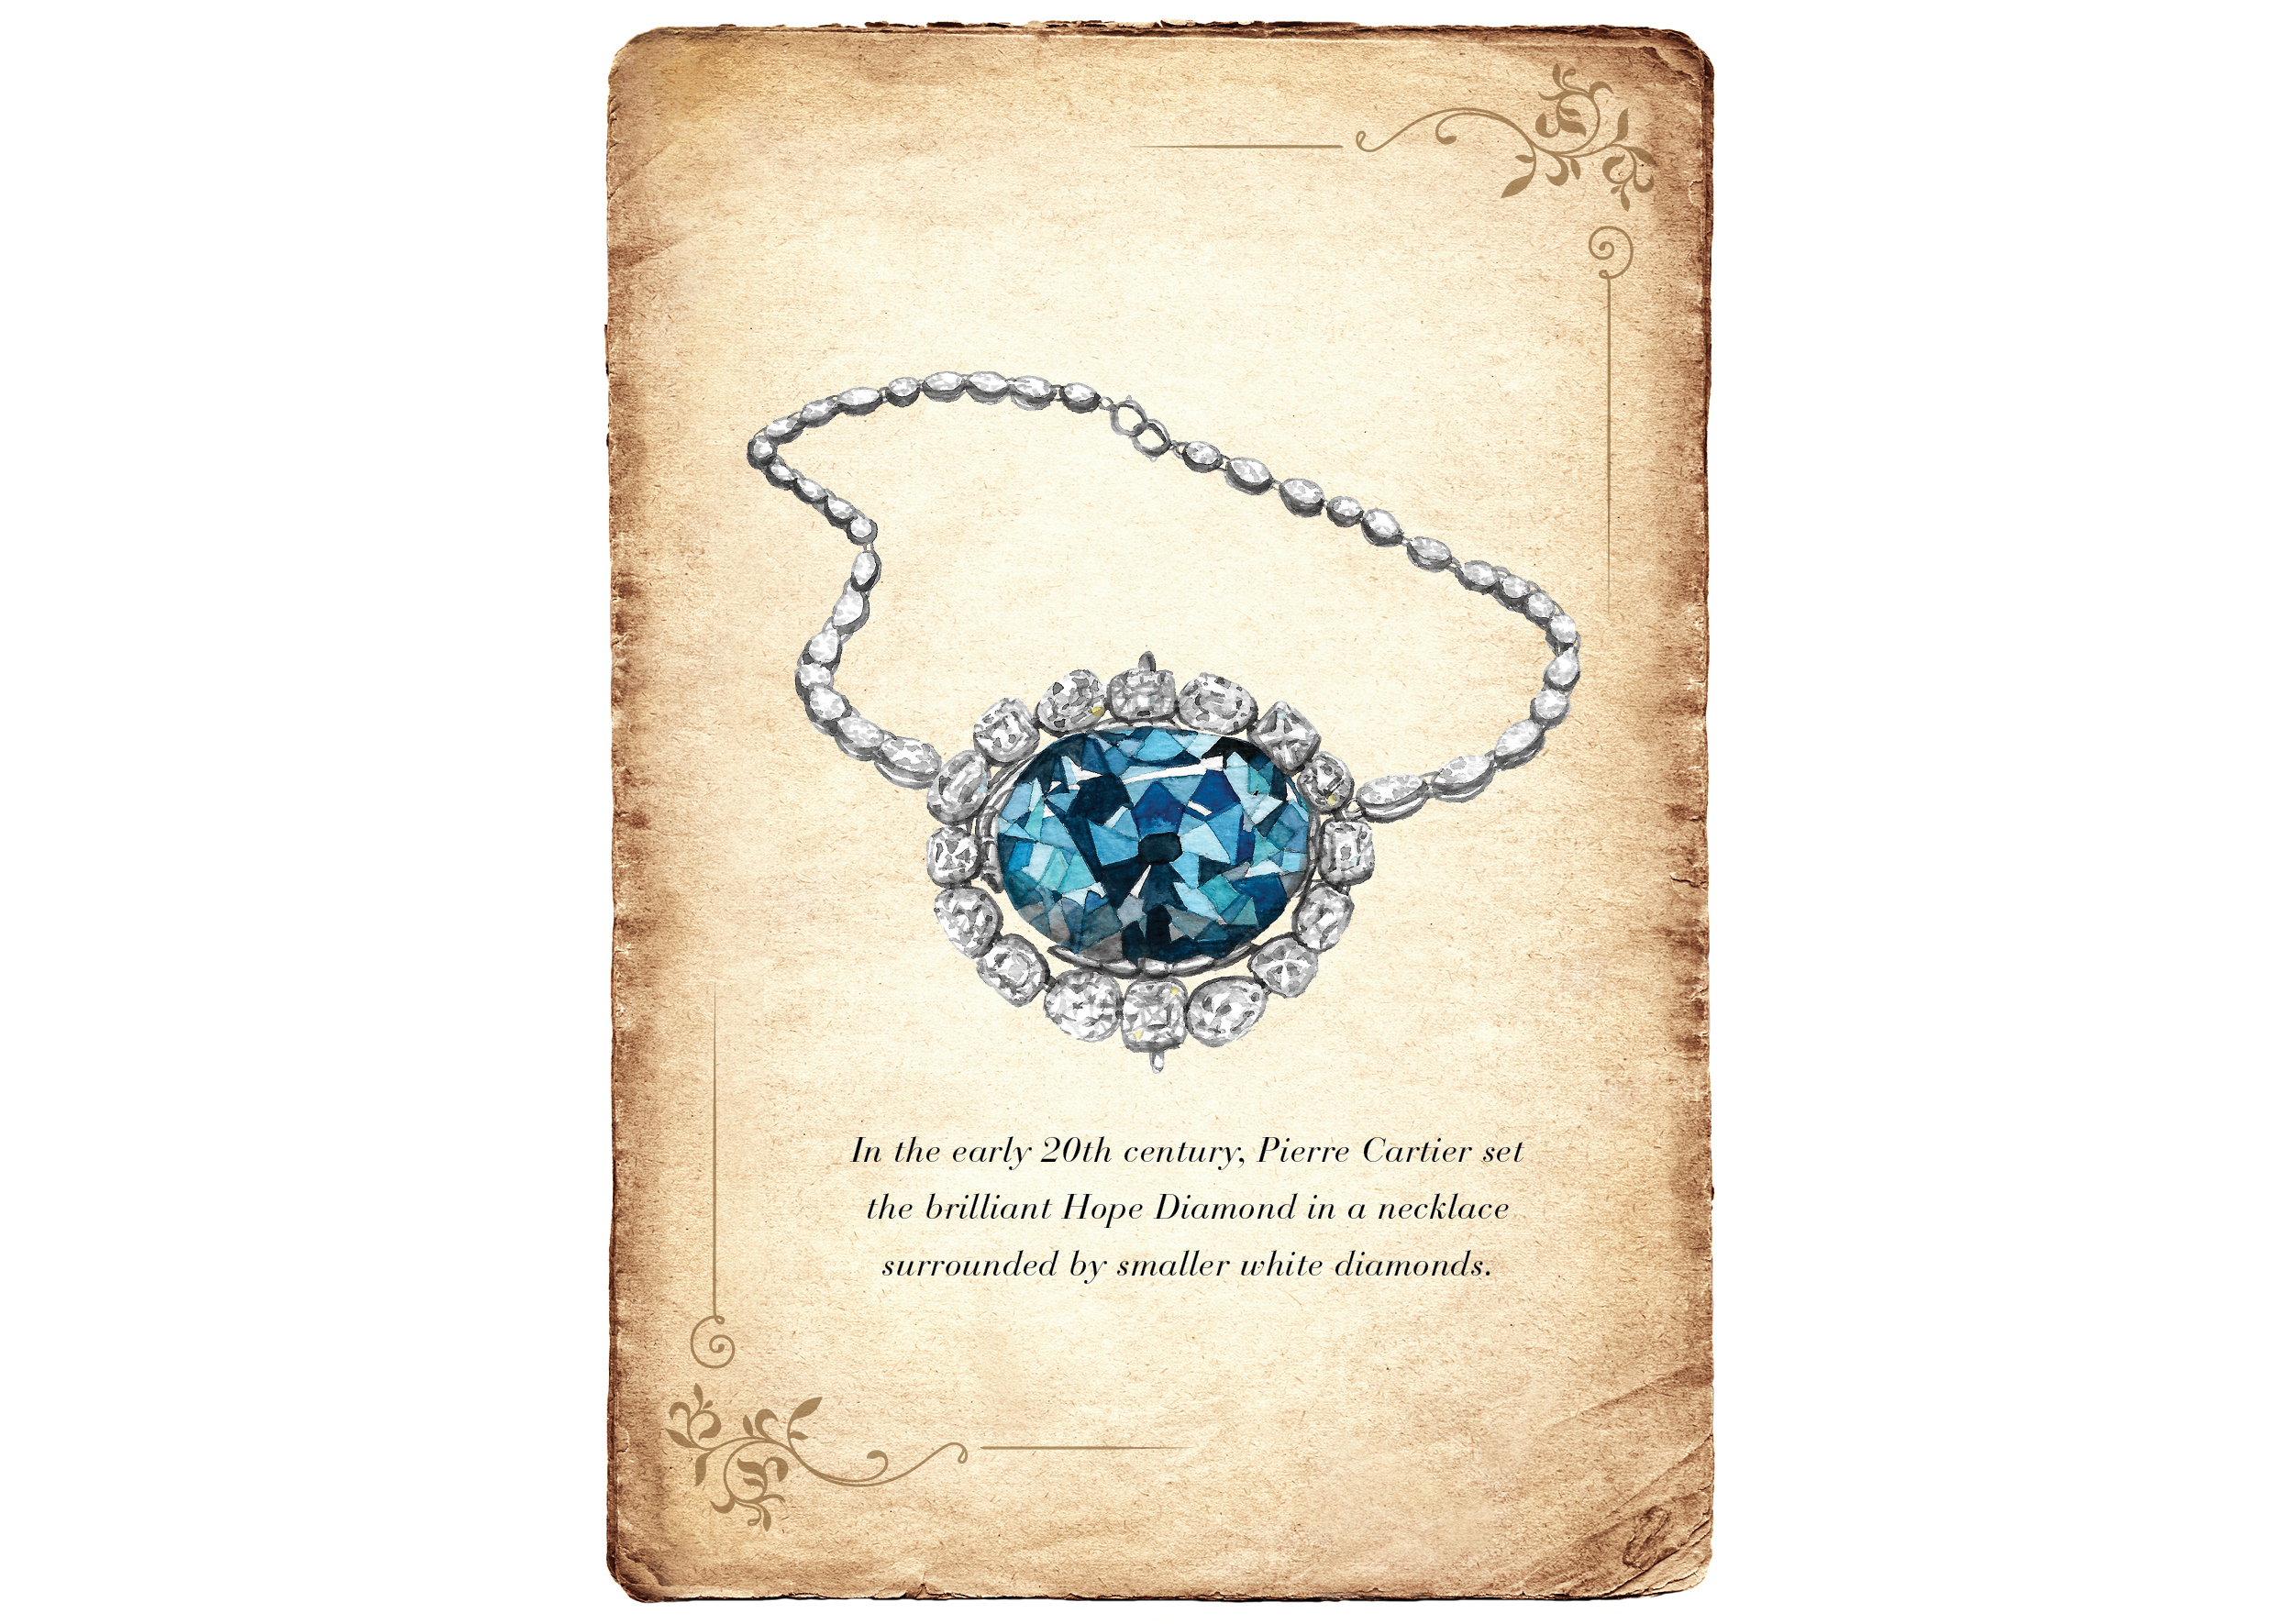 Hope Diamond in the necklace
